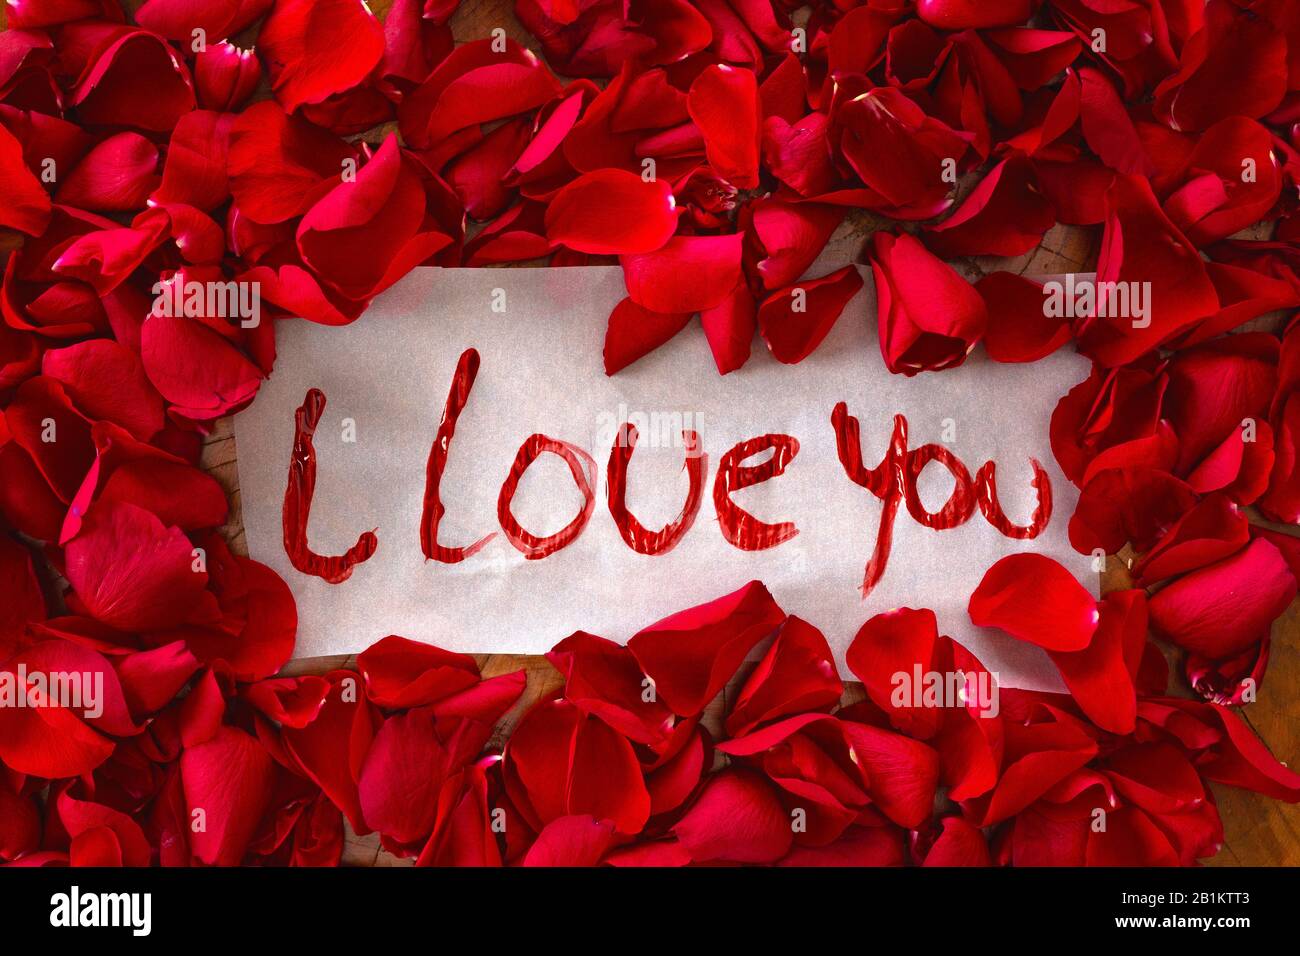 “Amazing Collection of Full 4K I Love You Images with Roses – Over 999 Top Picks”